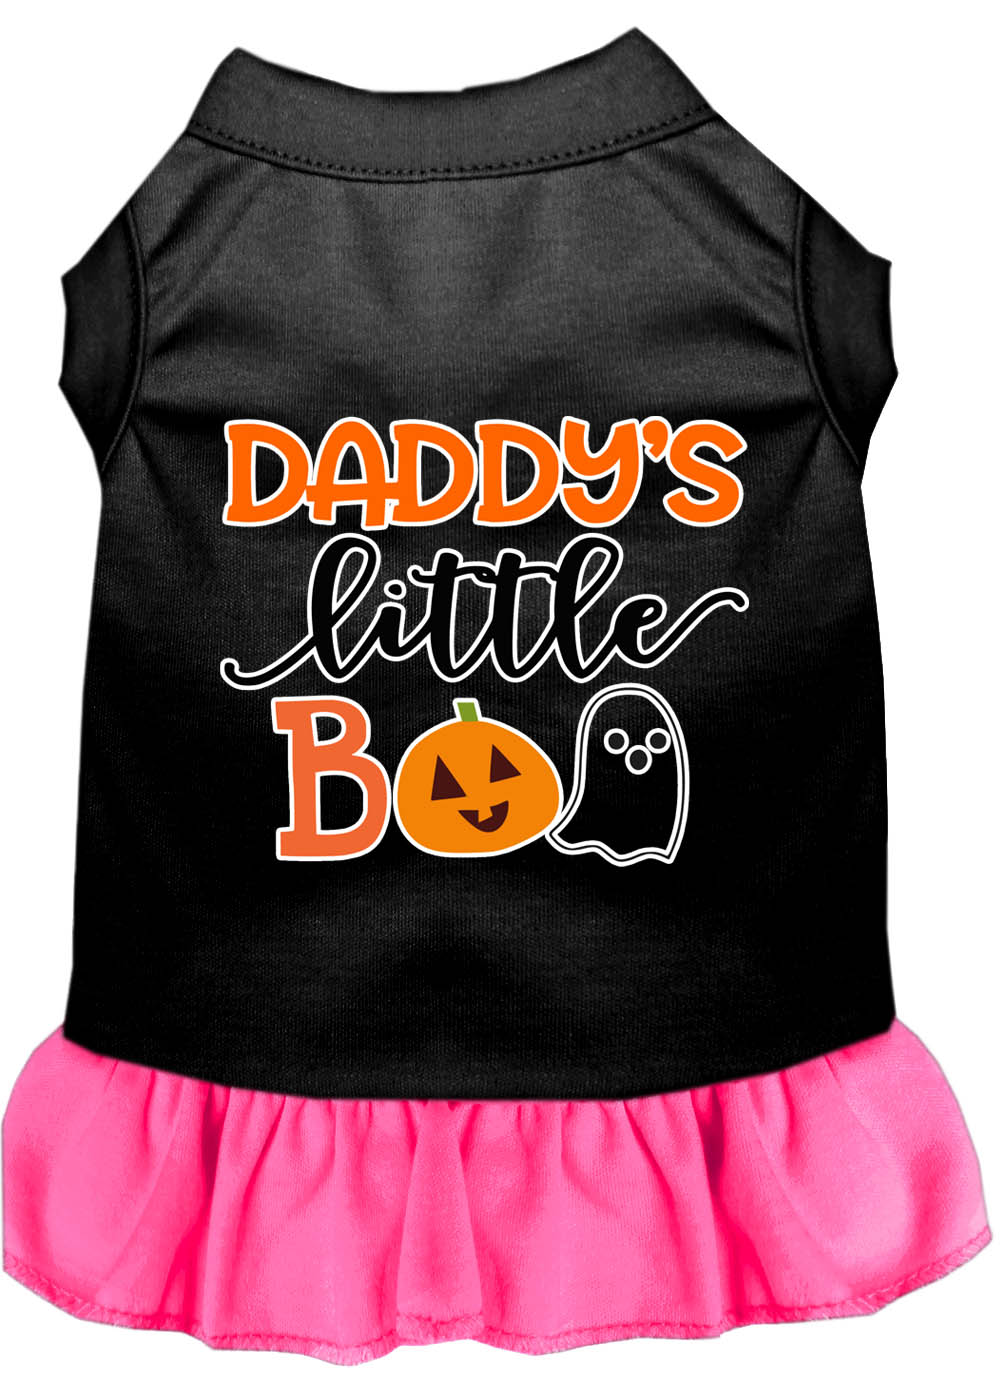 Daddy's Little Boo Screen Print Dog Dress Black with Bright Pink Sm